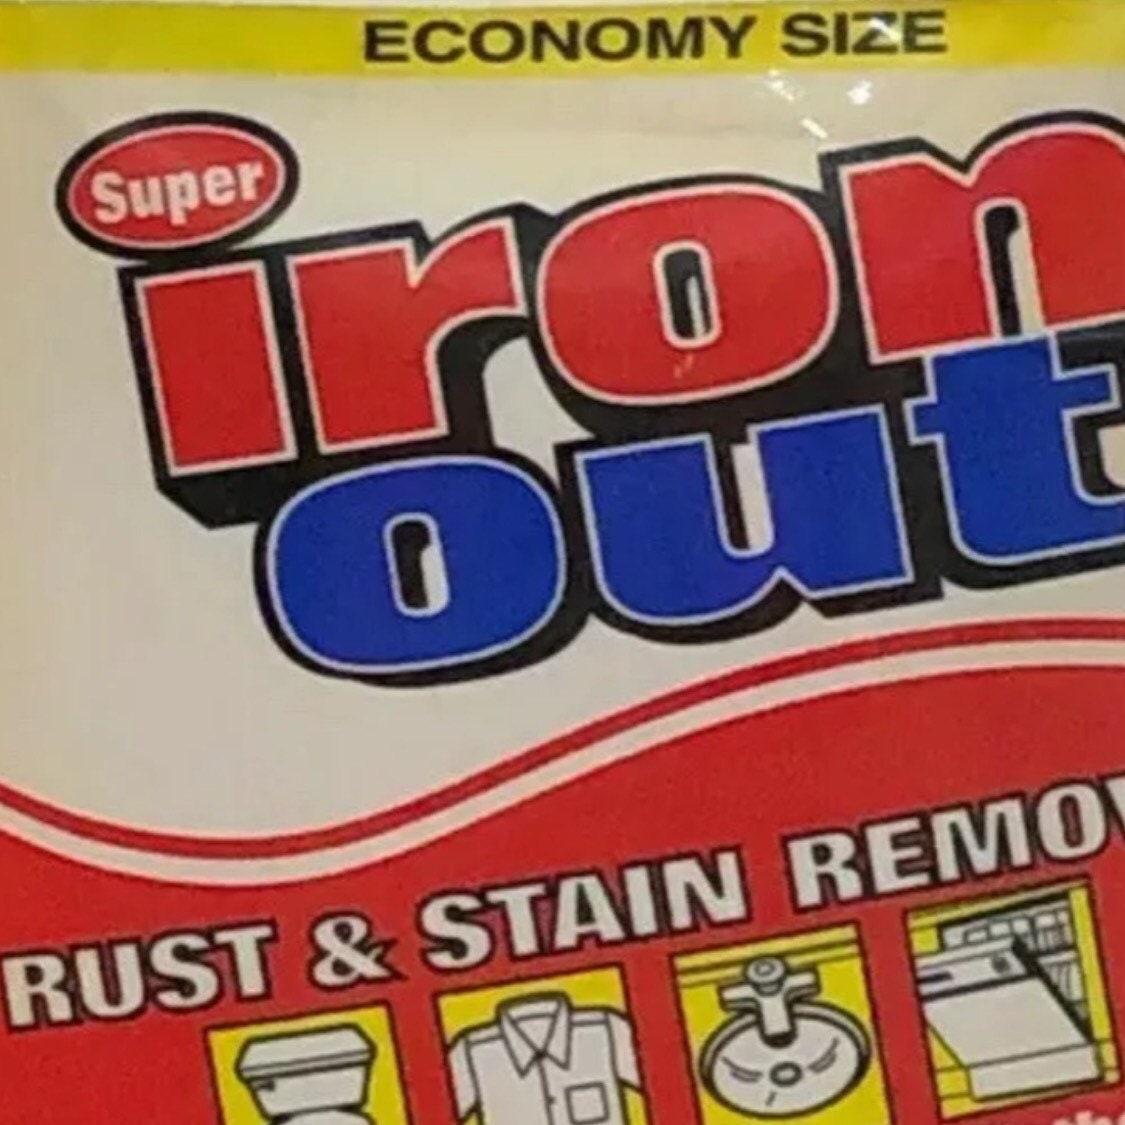 Super Iron Out Rust Stain Remover Powder 5 Lb New Old Stock 1999 Original  USA 